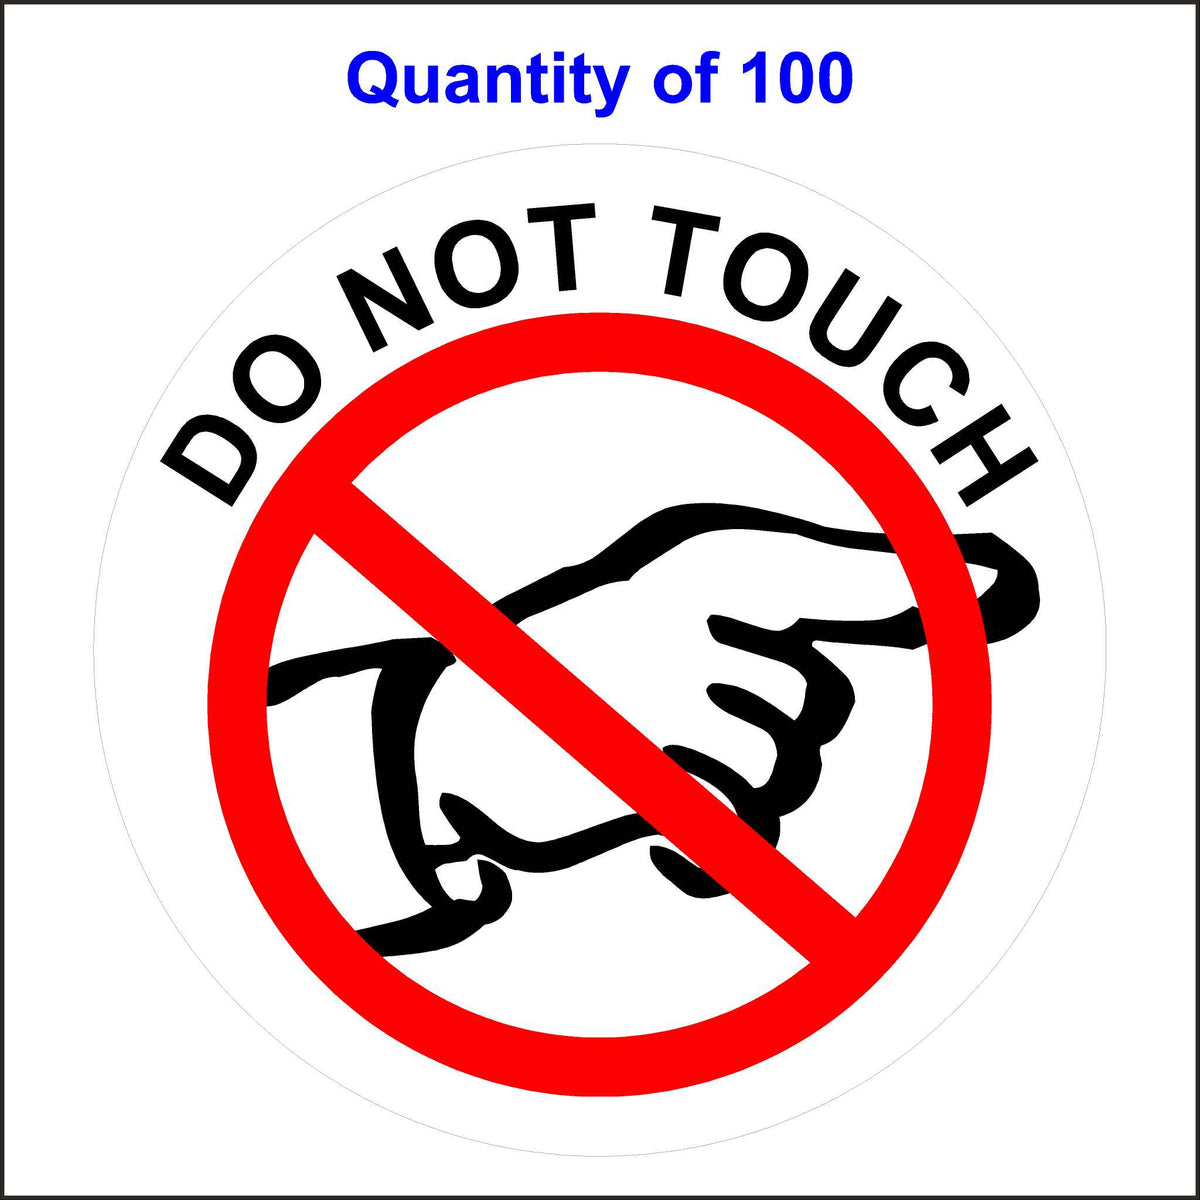 Do Not Touch Sticker With Finger Pointing. 100 Quantity.